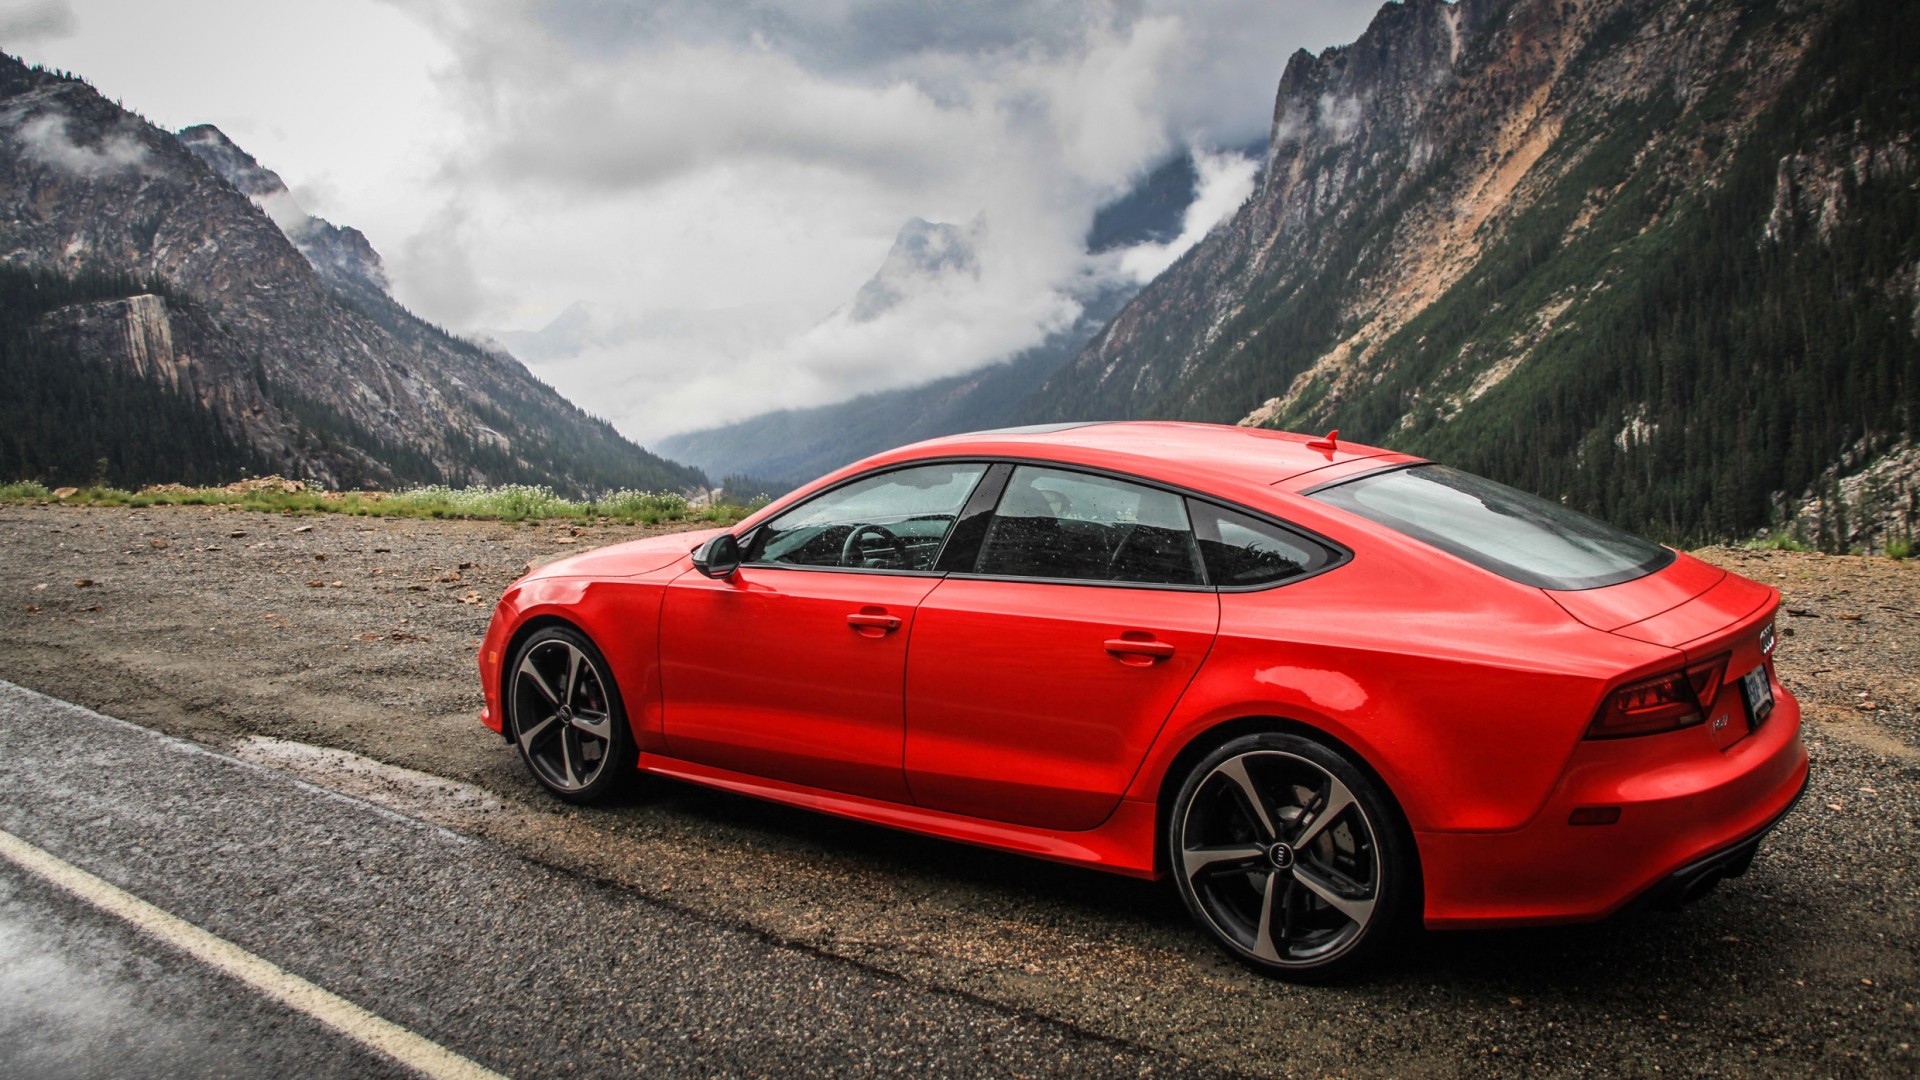 Audi RS7 Audi Red Cars Mountains Vehicle Car 1920x1080